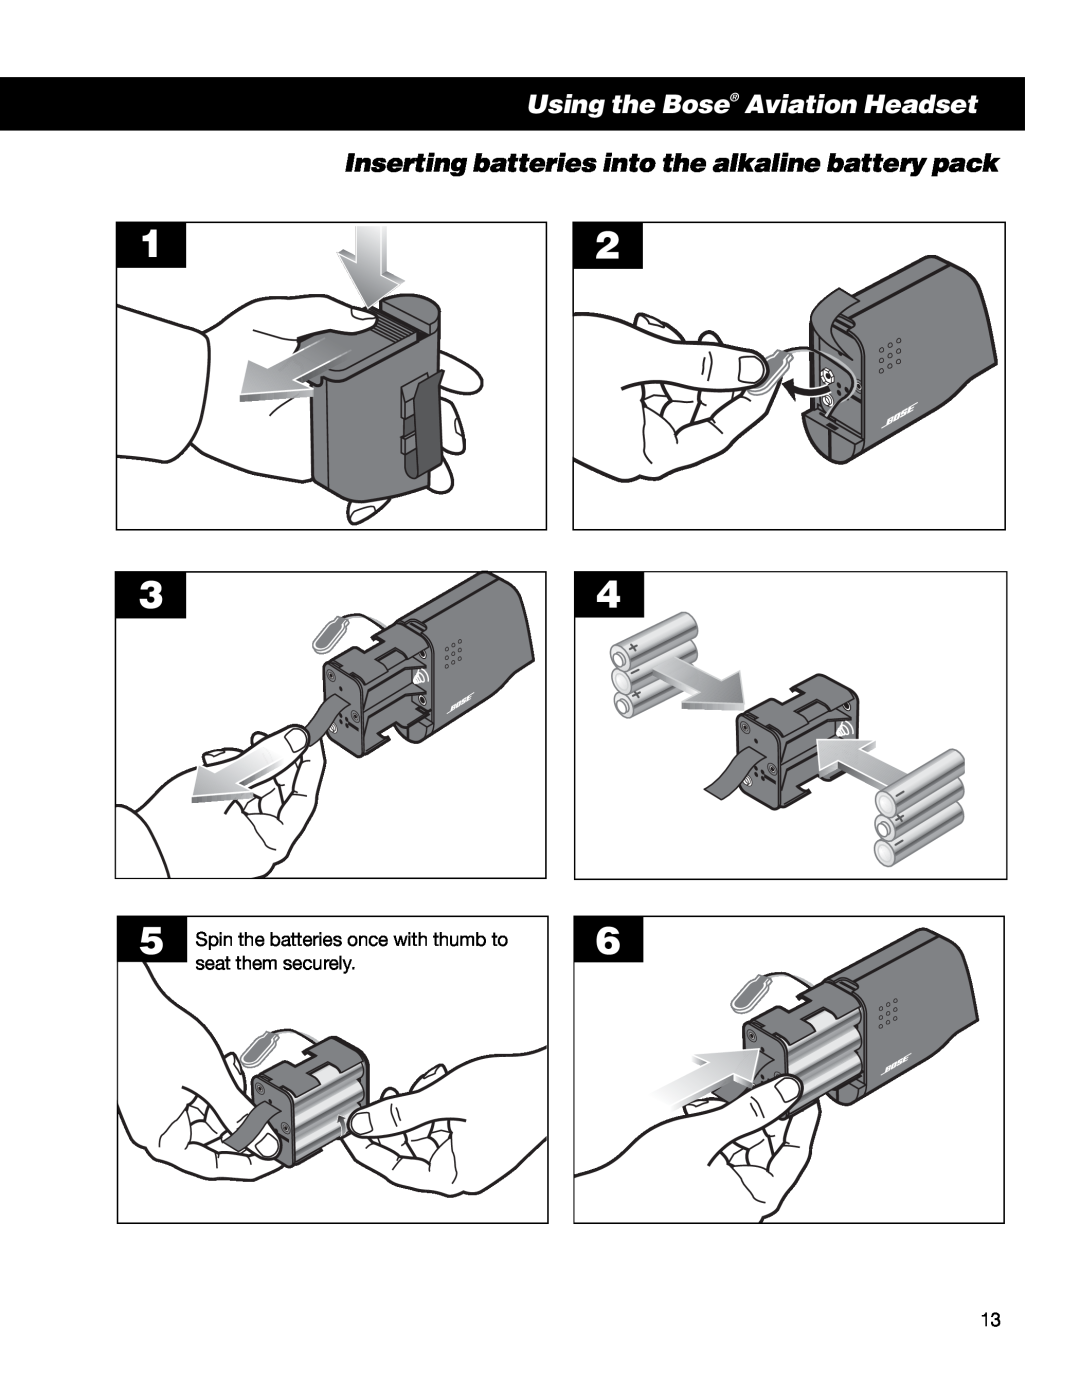 Bose II manual Using the Bose Aviation Headset, seat them securely, Spin the batteries once with thumb to 